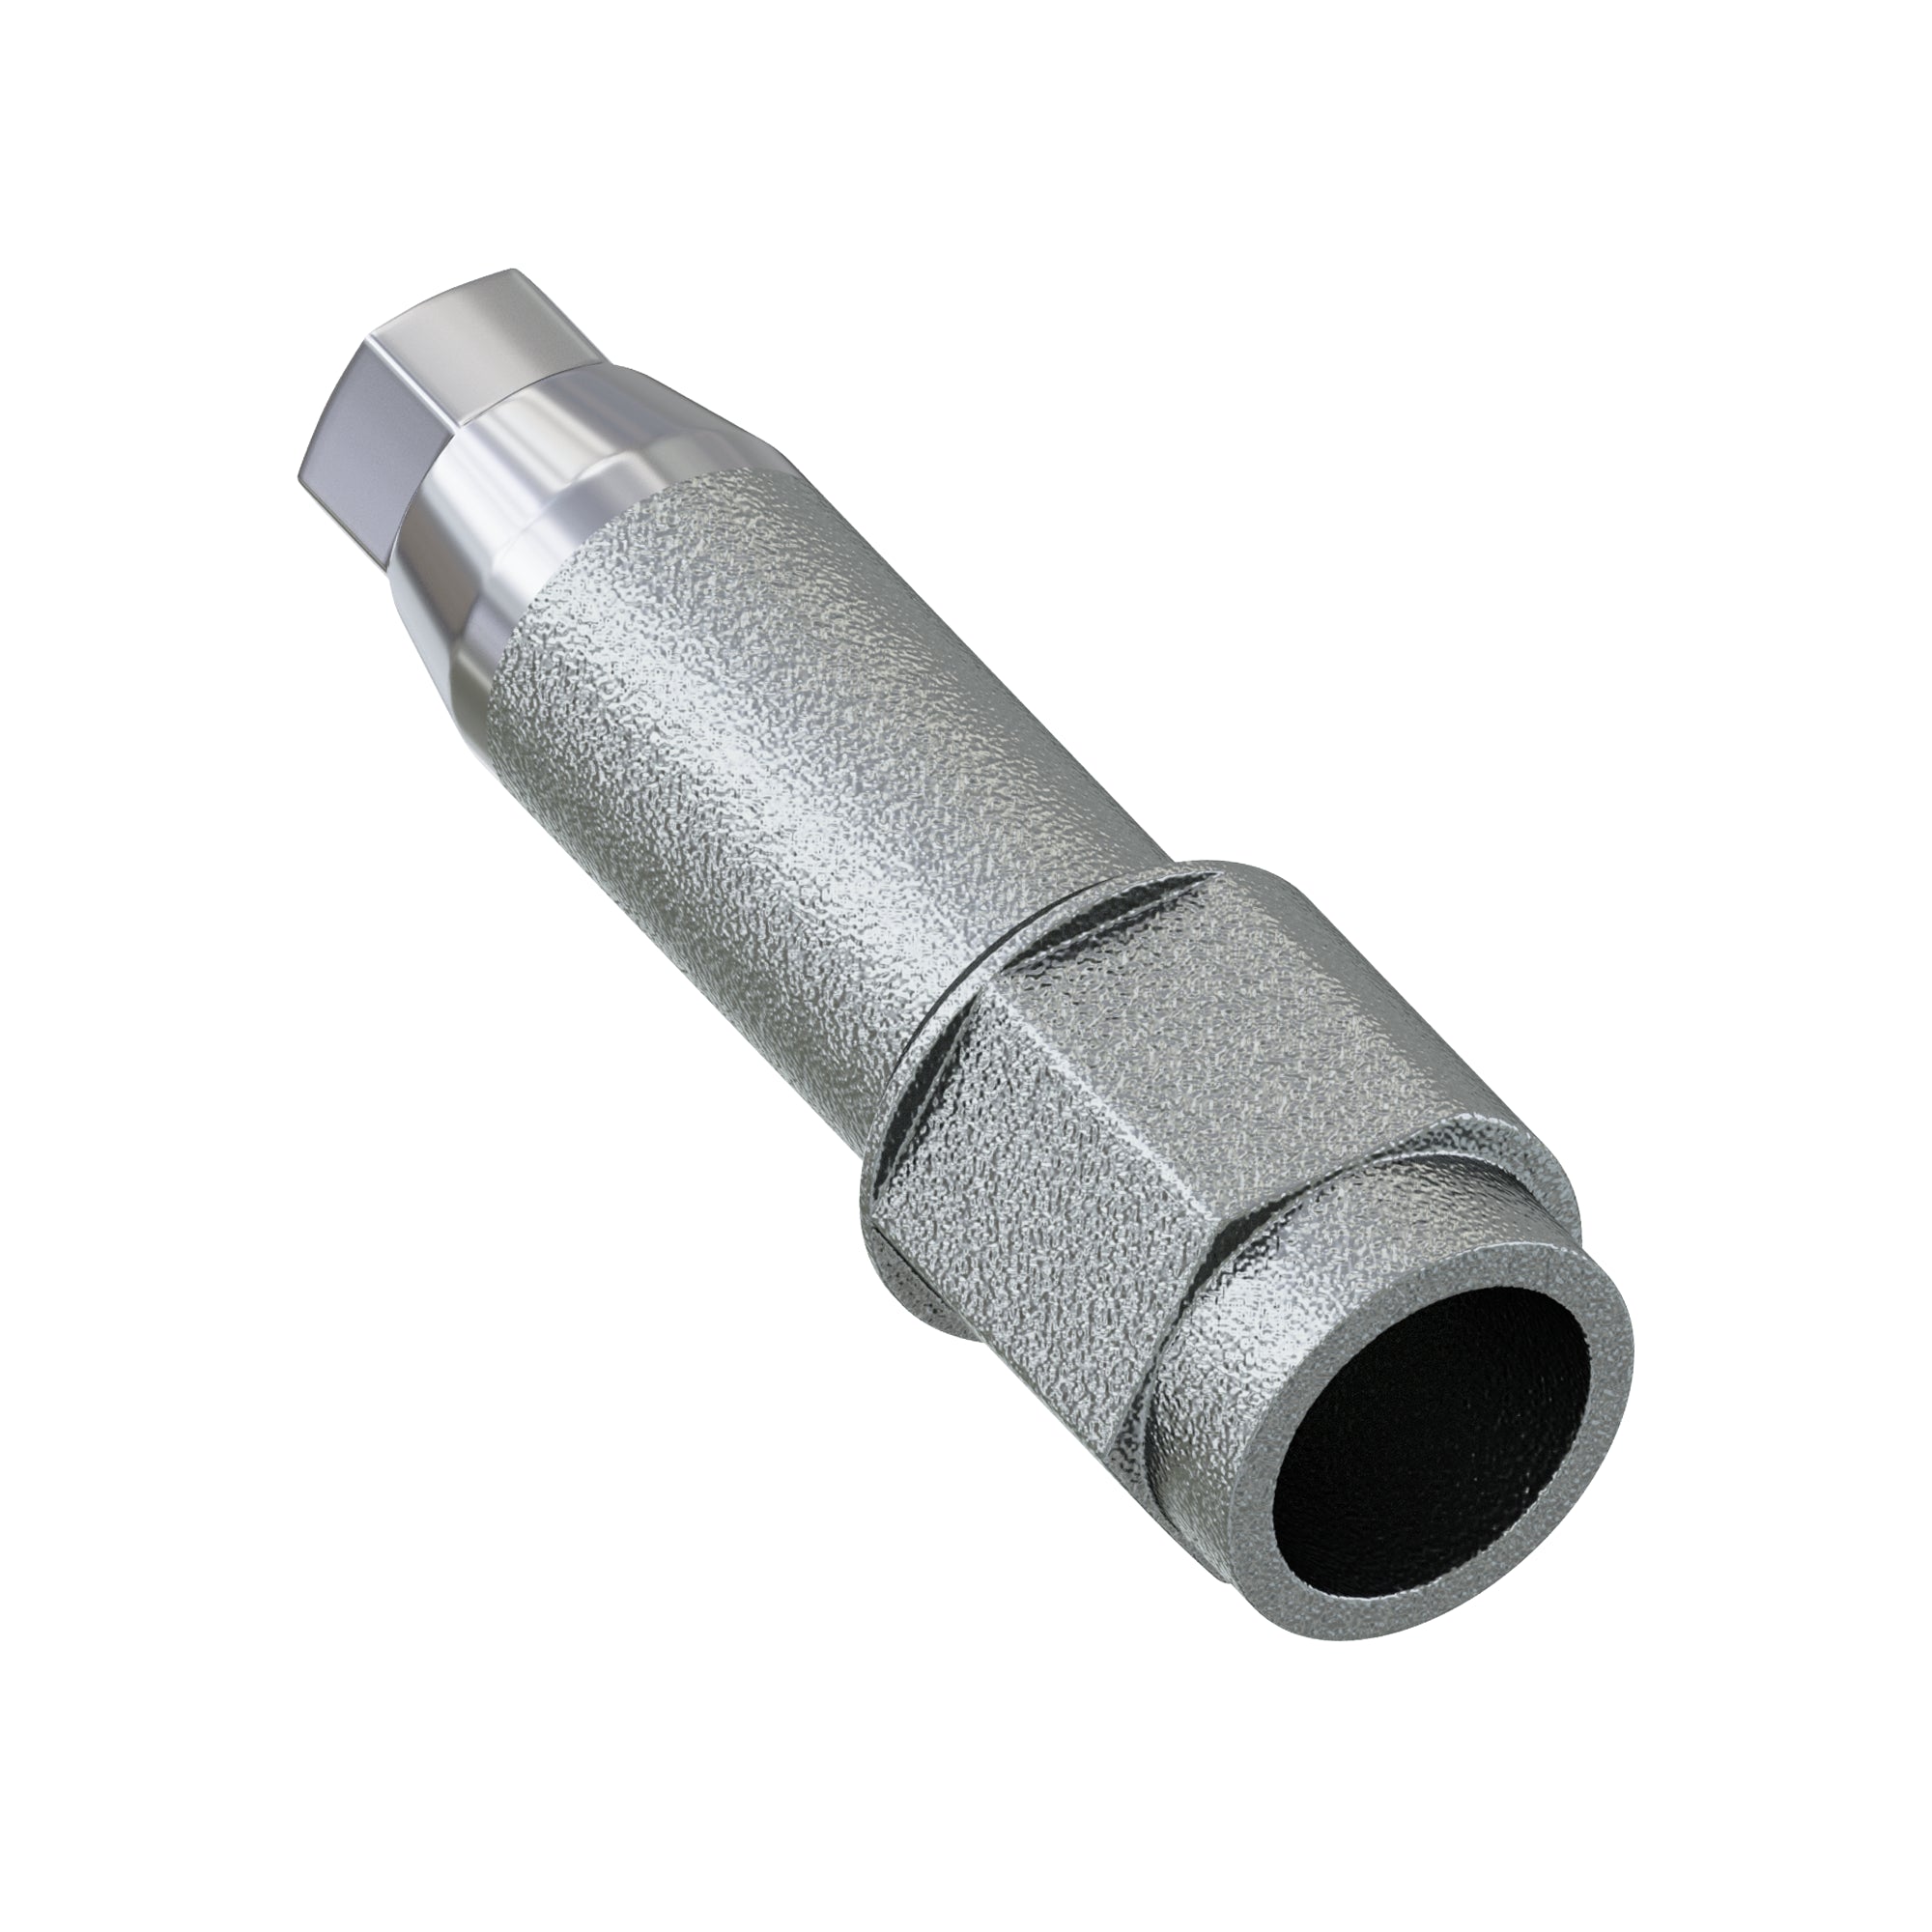 DSI Titanium Scan Post Body Conical Connection 3.0mm - Conical Connection NP Ø3.5mm